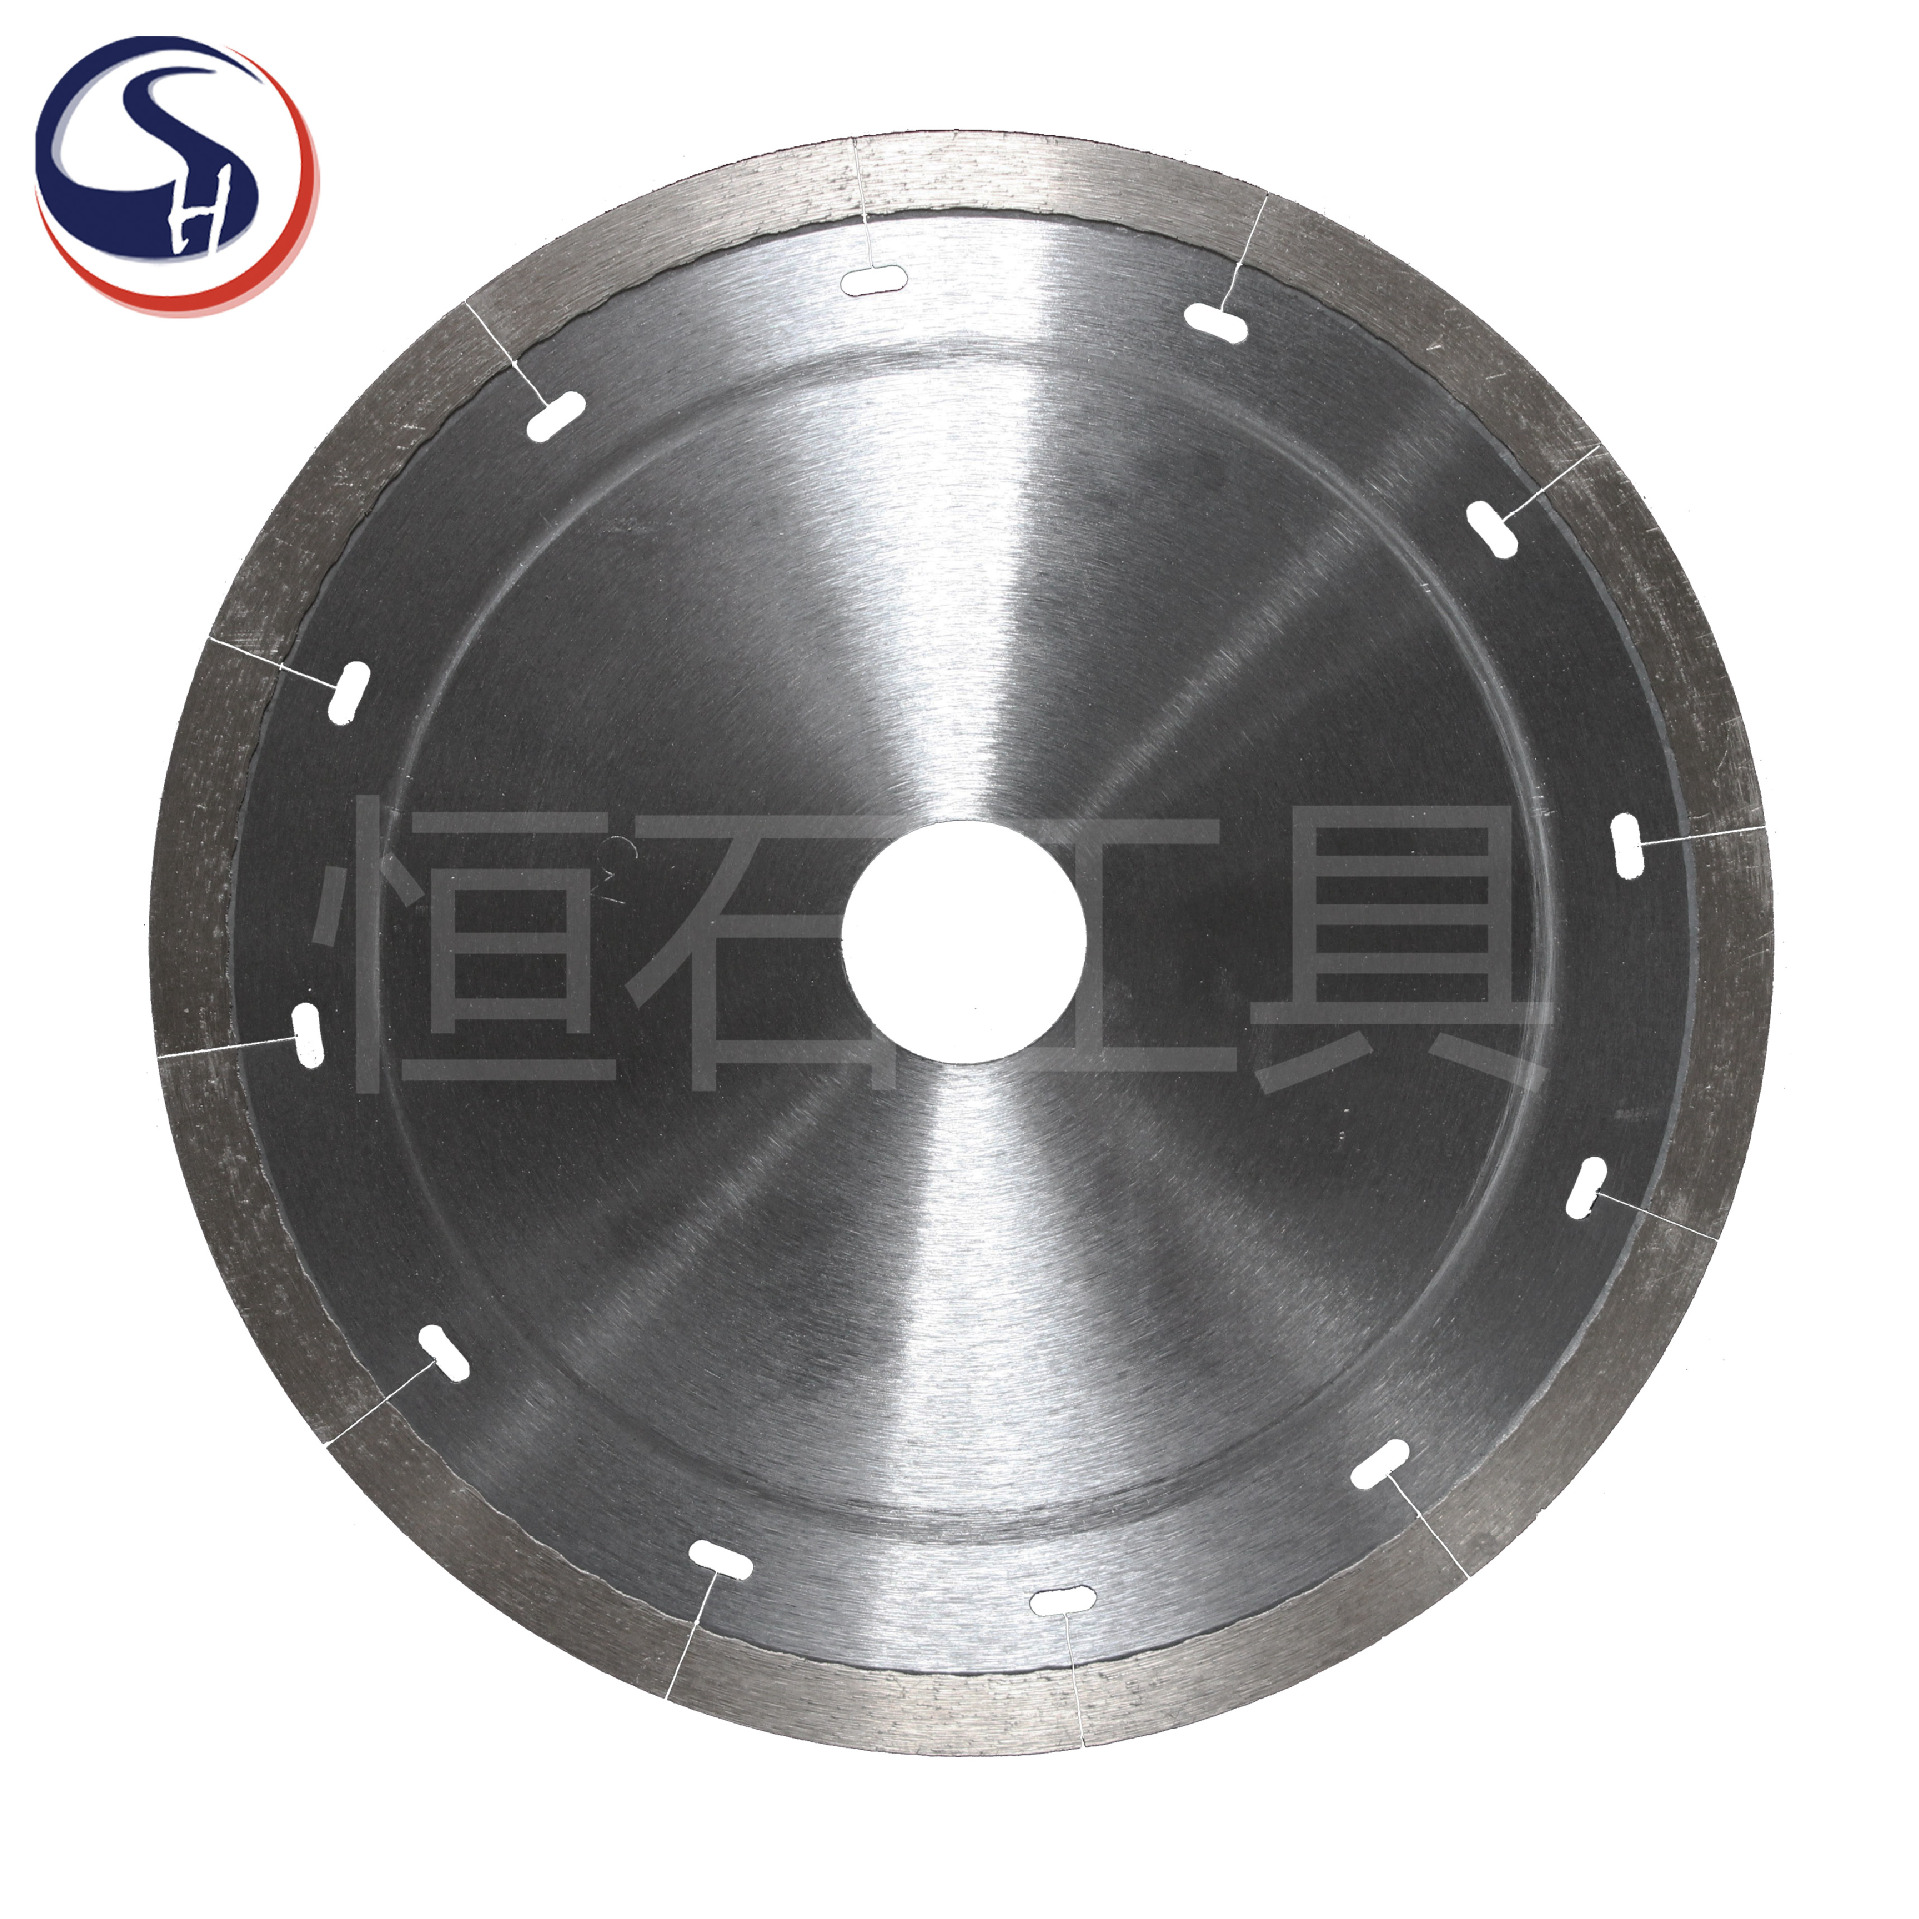 Export to India Market Ceramic Cutting Disc Marble Saw Blade Stone Cutting Disc Diamond Saw Blade Factory